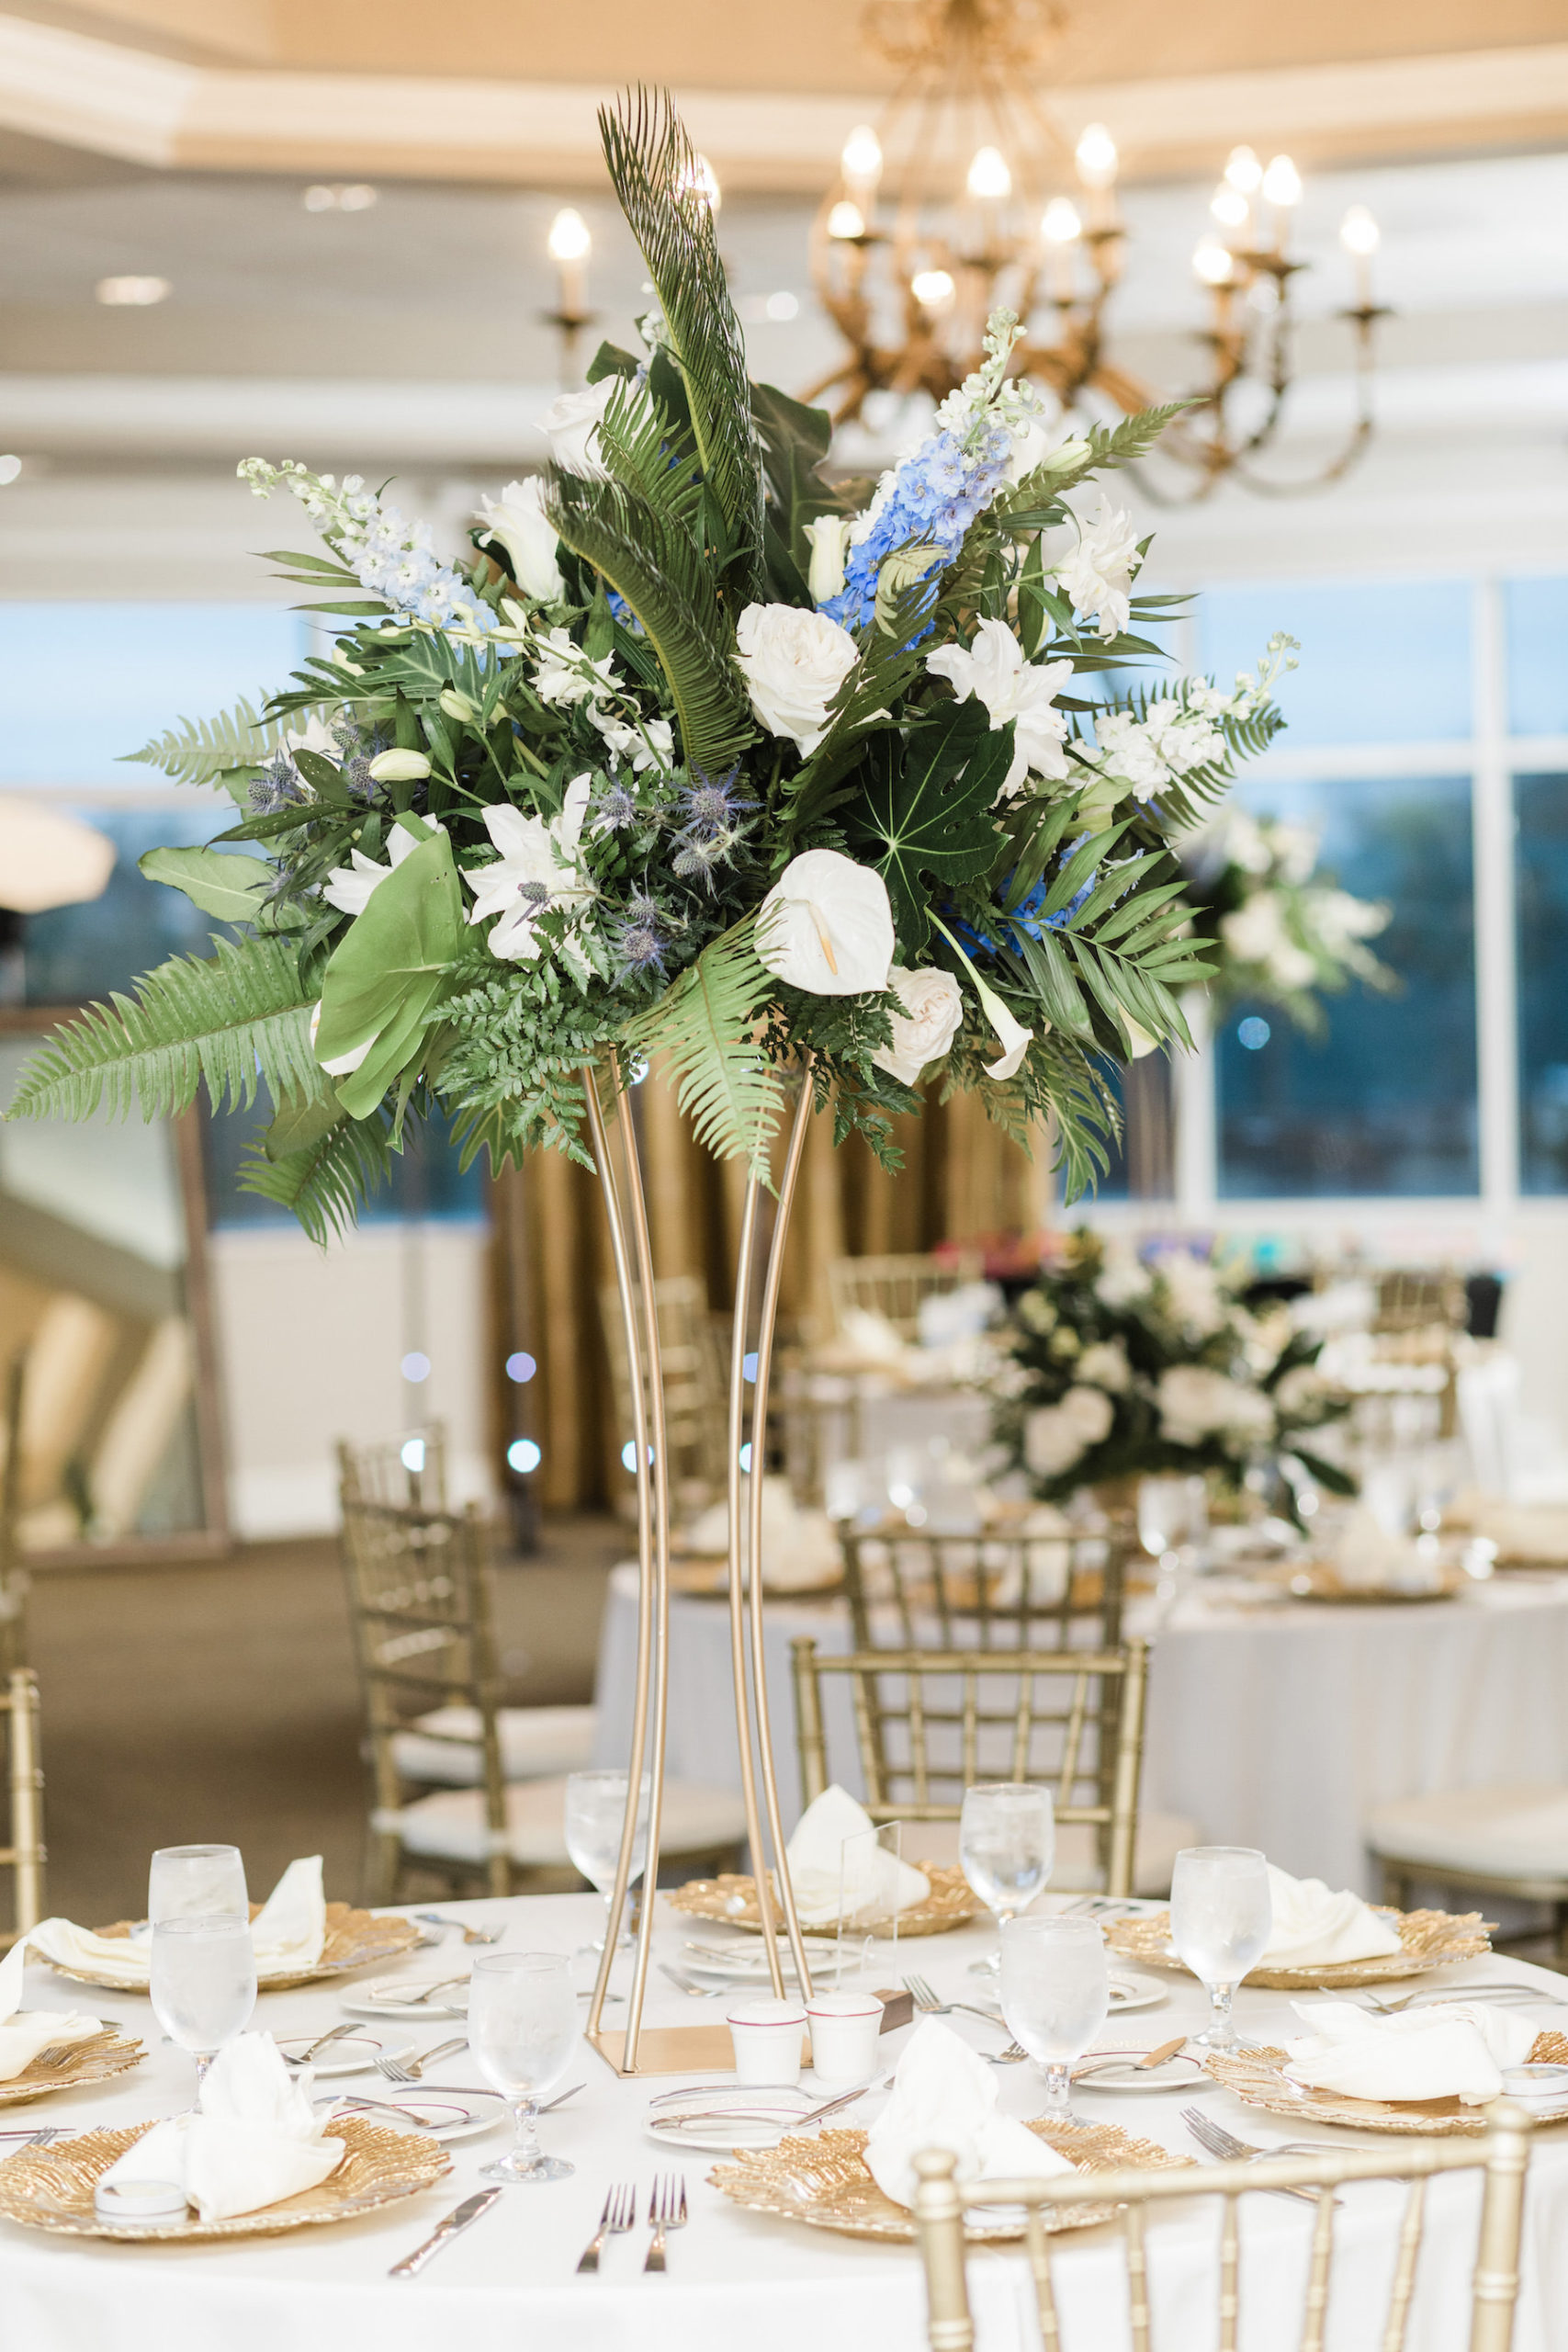 Indoor Ballroom Reception with Gold Chargers, Chiavari Chairs and Tall Tropical Centerpieces with Greenery, White and Blue Flowers